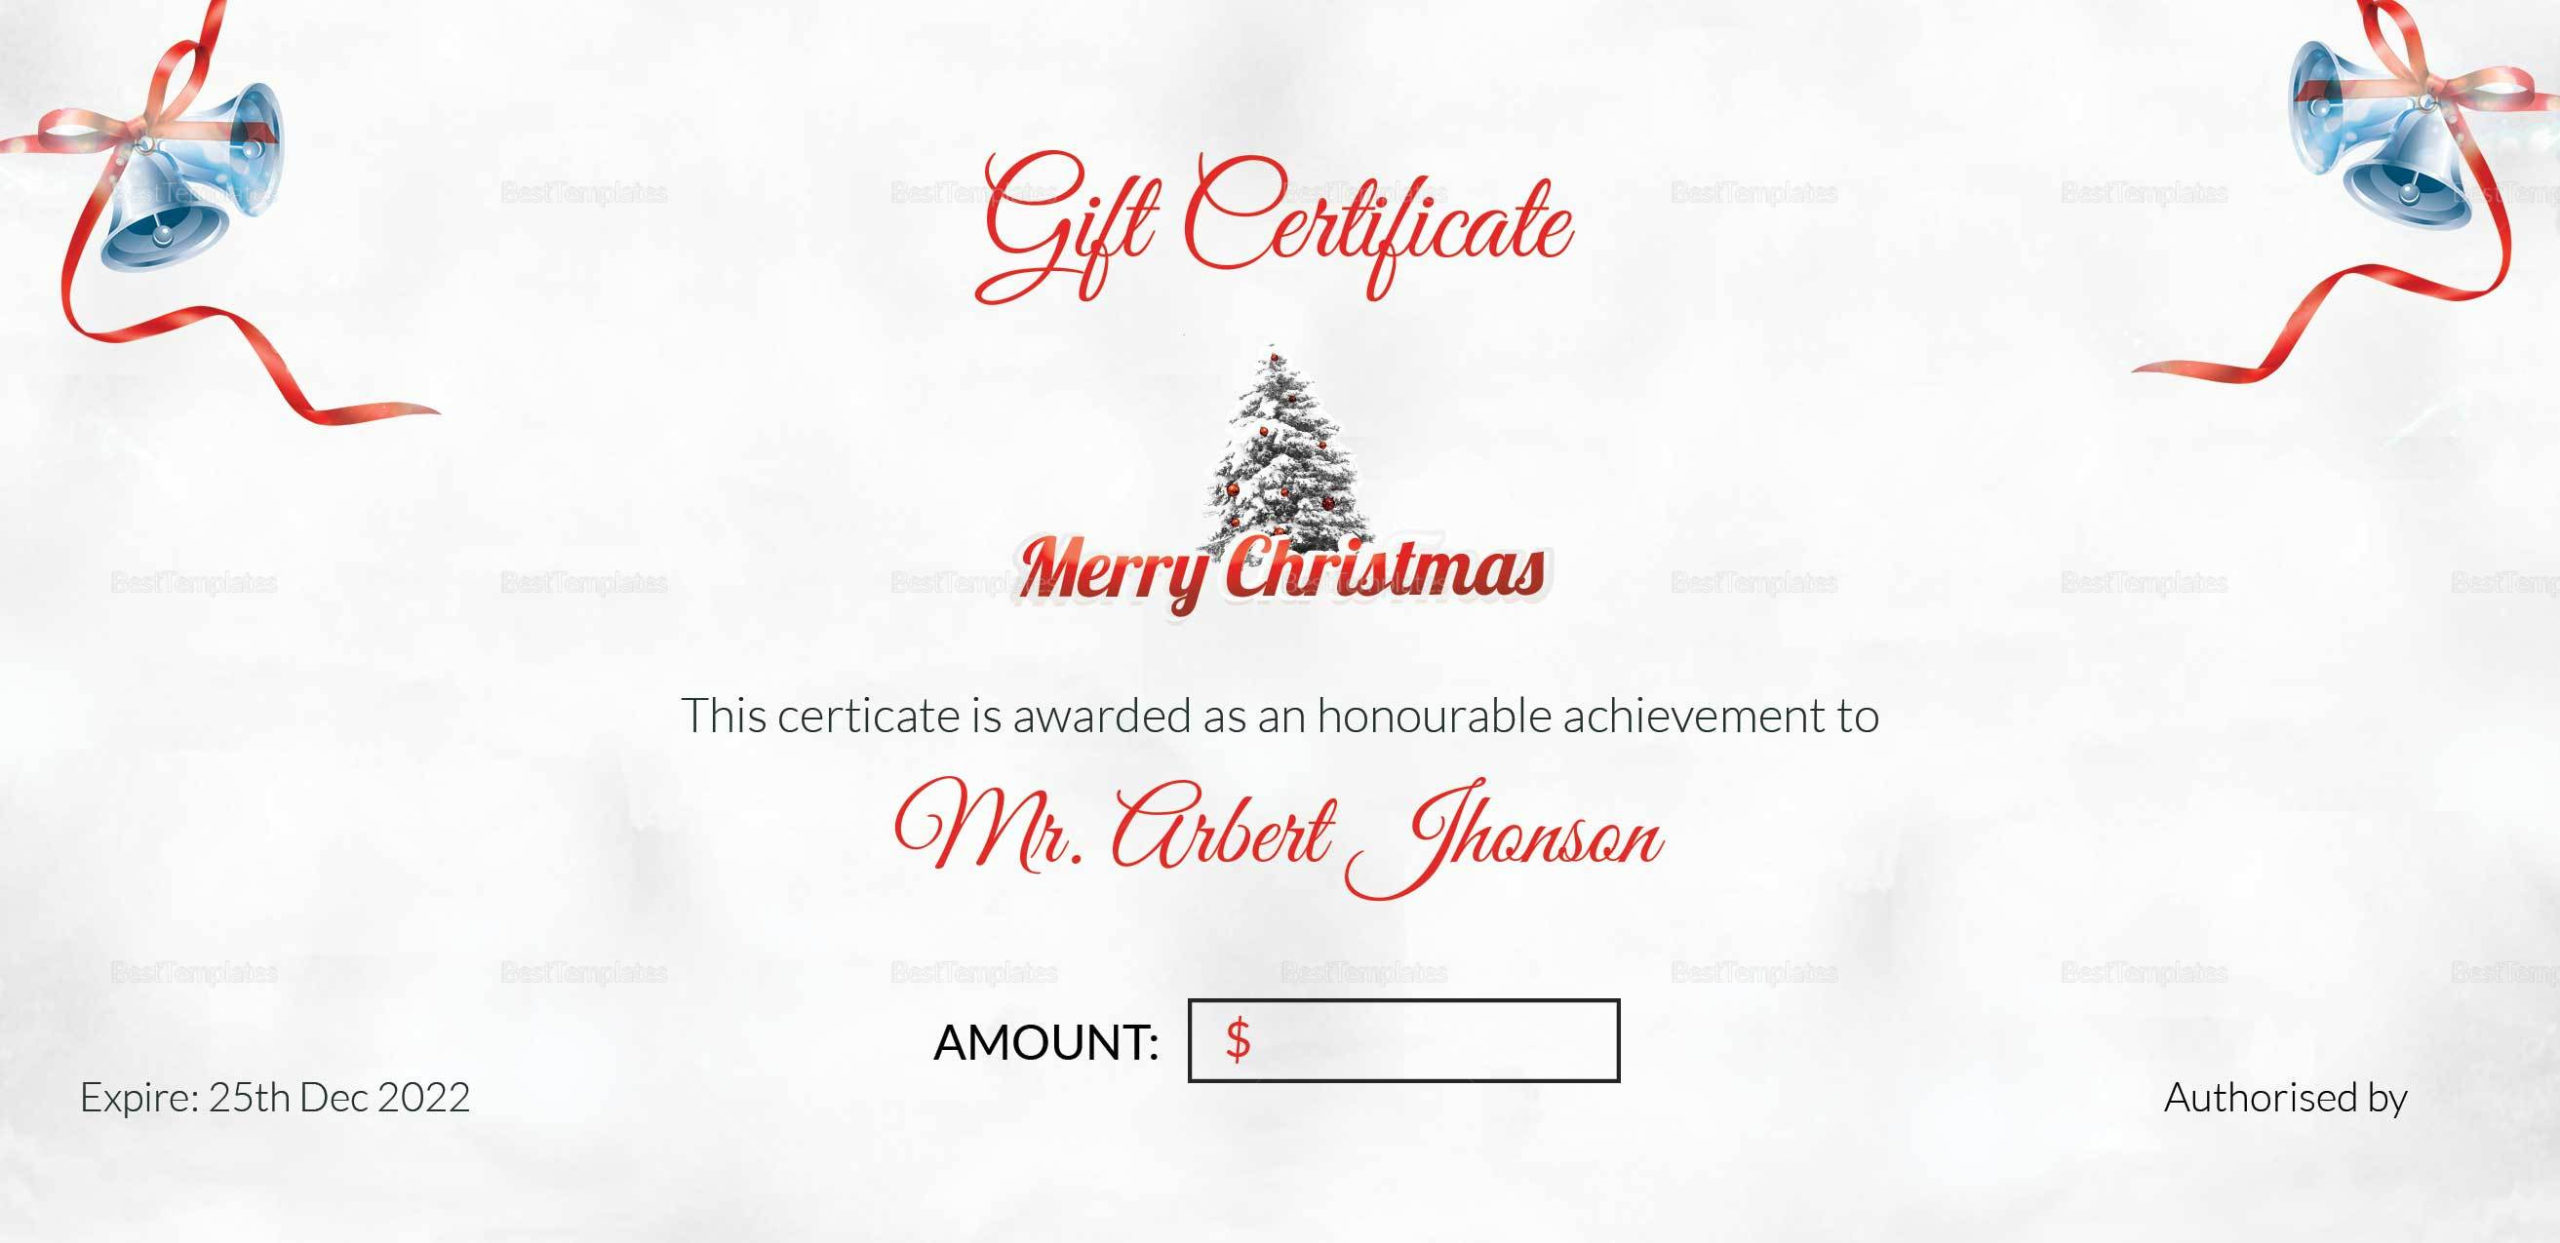 Christmas Bell Gift Certificate Template In Adobe Photoshop For New Free Christmas Gift Certificate Templates